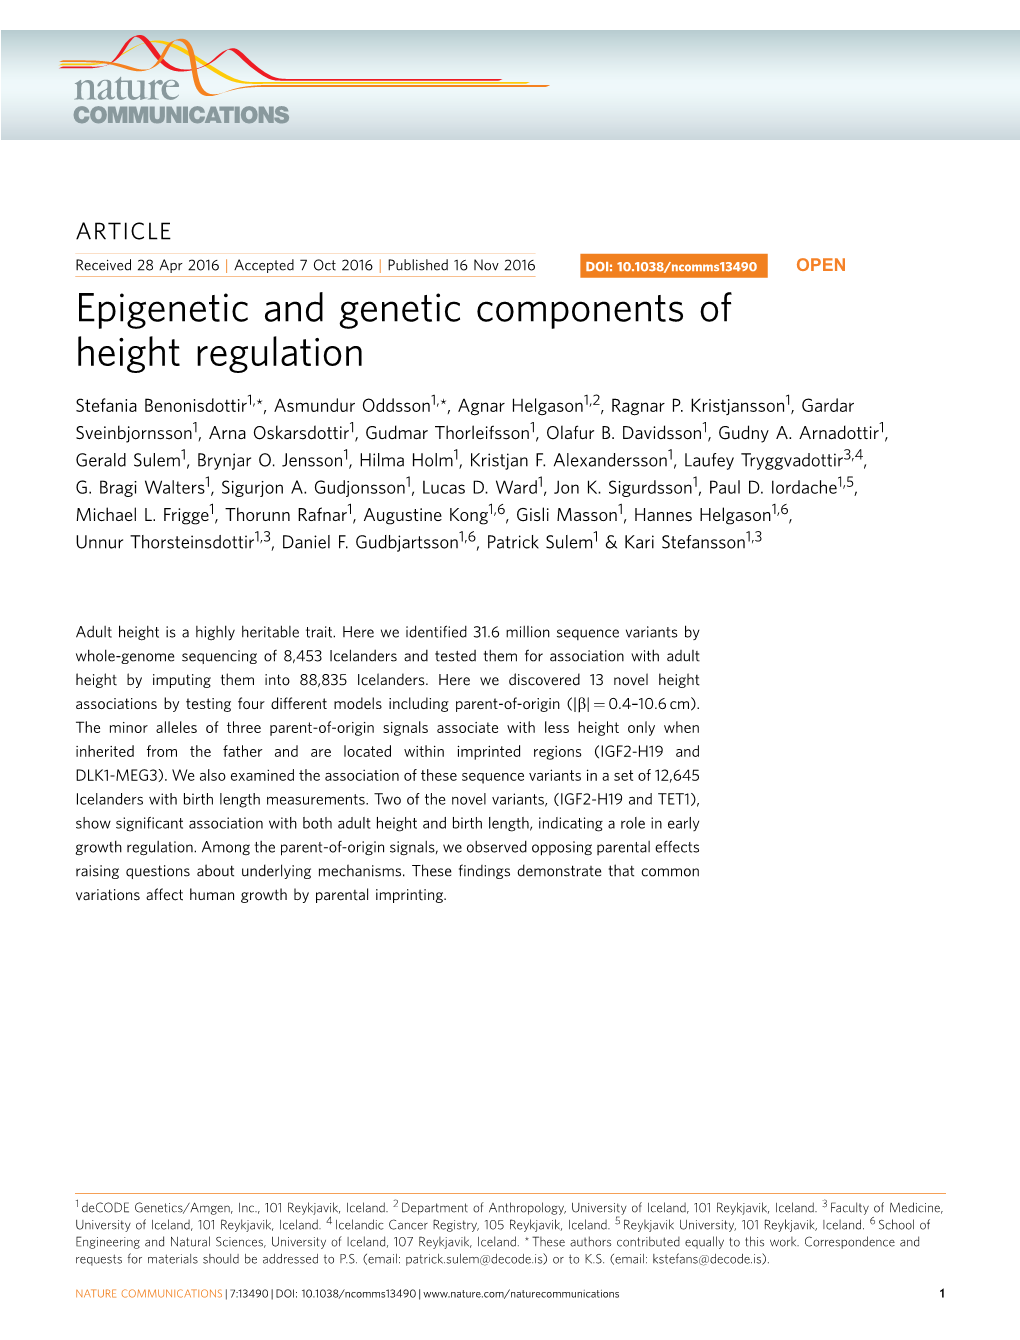 Epigenetic and Genetic Components of Height Regulation